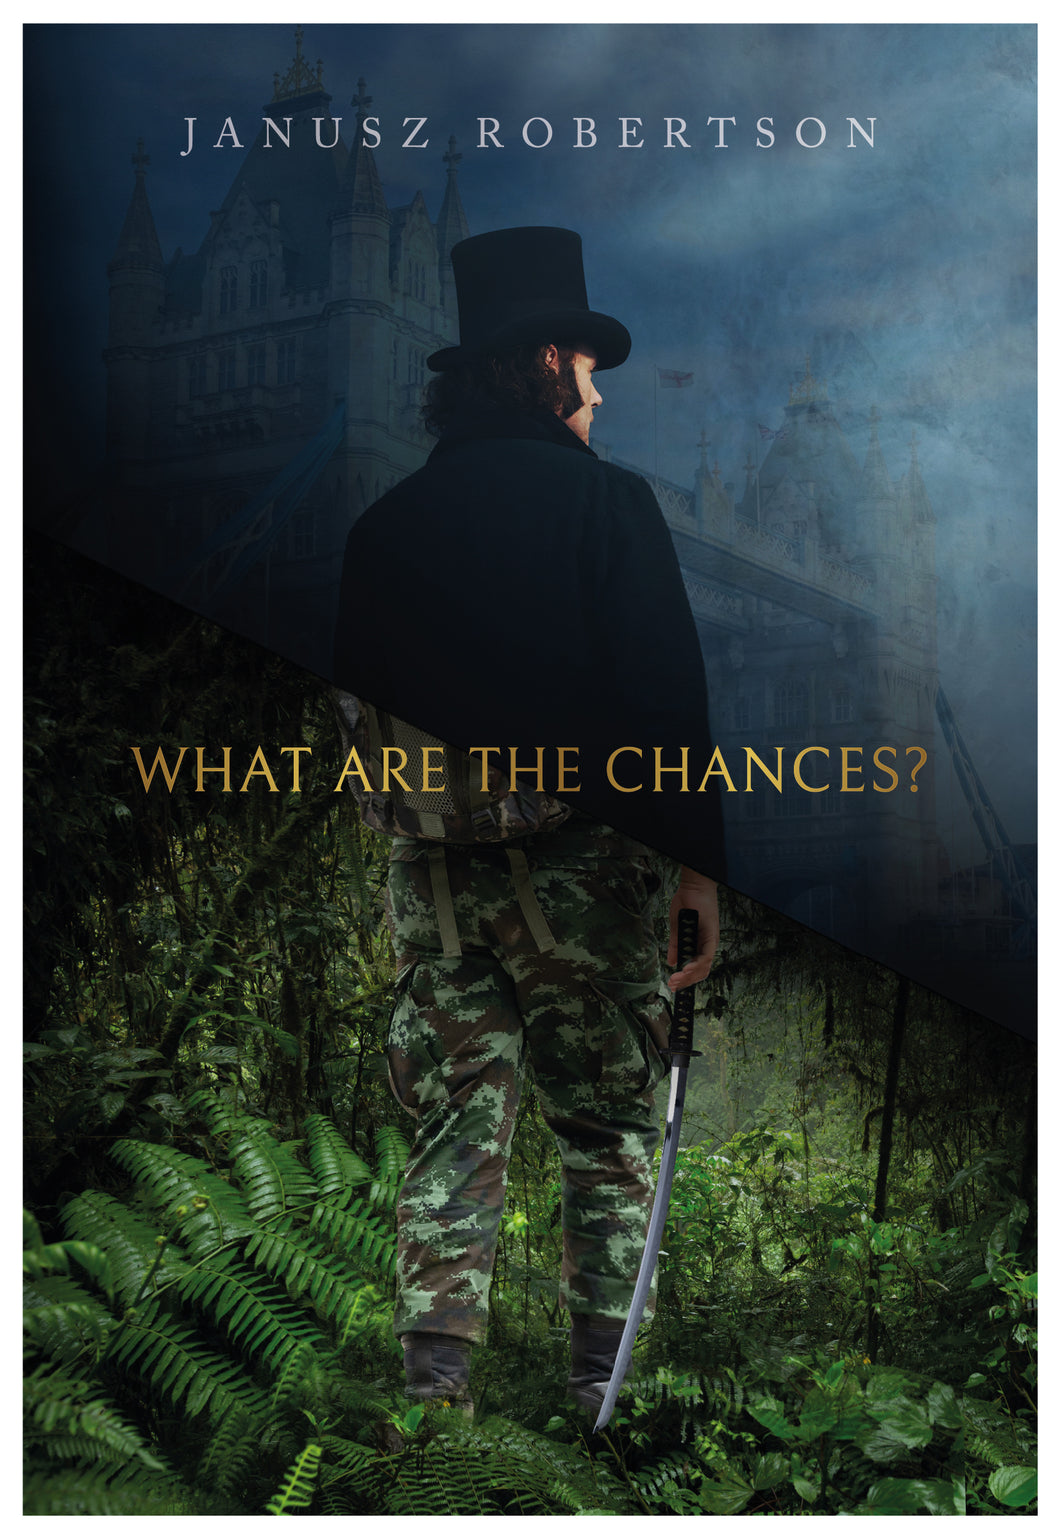 What Are The Chances? - Janusz Robertson